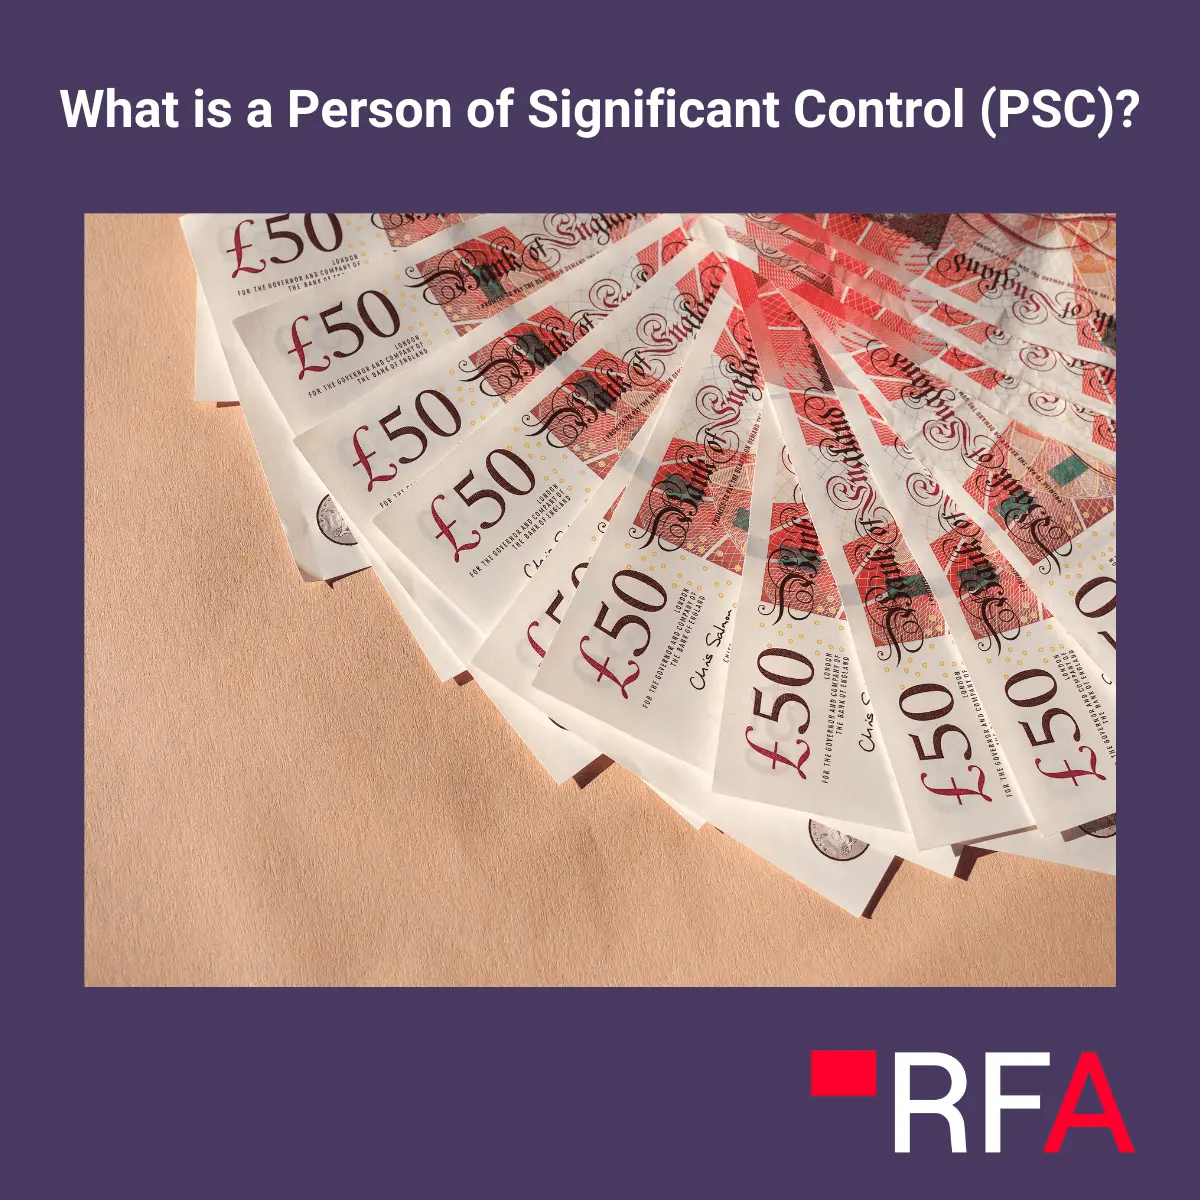 What is a Person of Significant Control (PSC) in a Company?